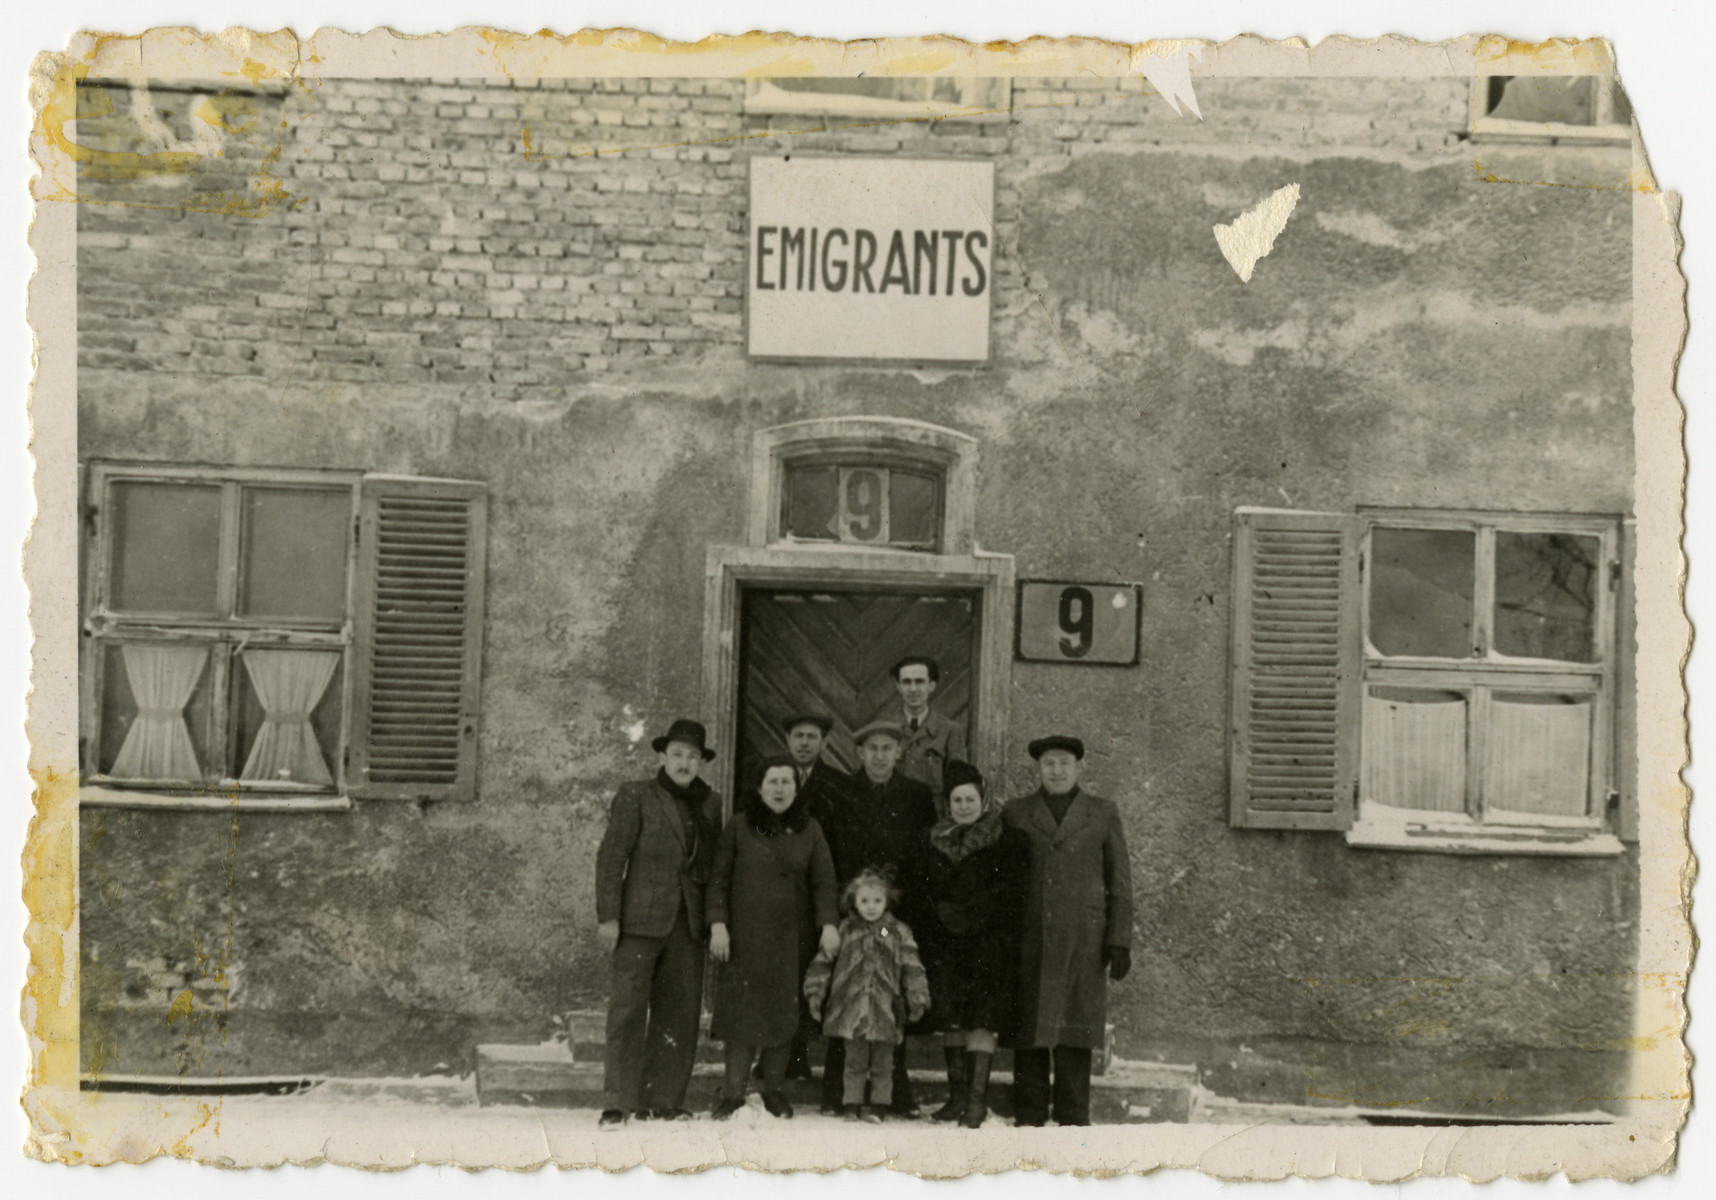 Jewish displaced persons pose in front of the emigration office in Bamberg.

From left to right in the front are Solomon, Ruchla and Frieda Zynstein.